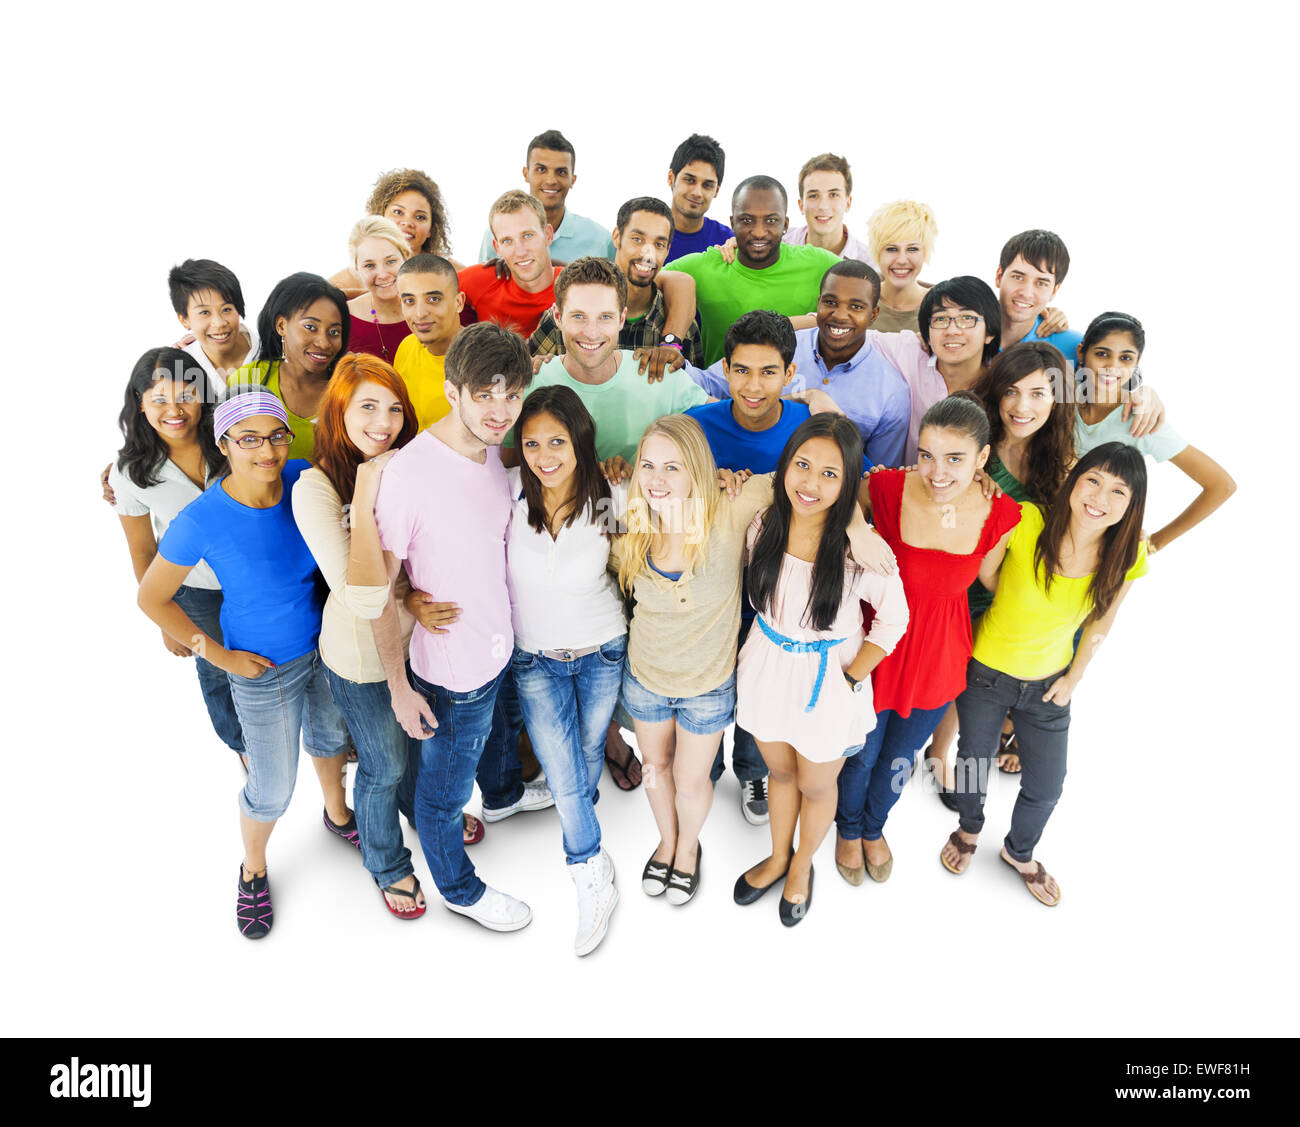 Multi-Ethnic Group Young Adult Friend Friendship Stock Photo